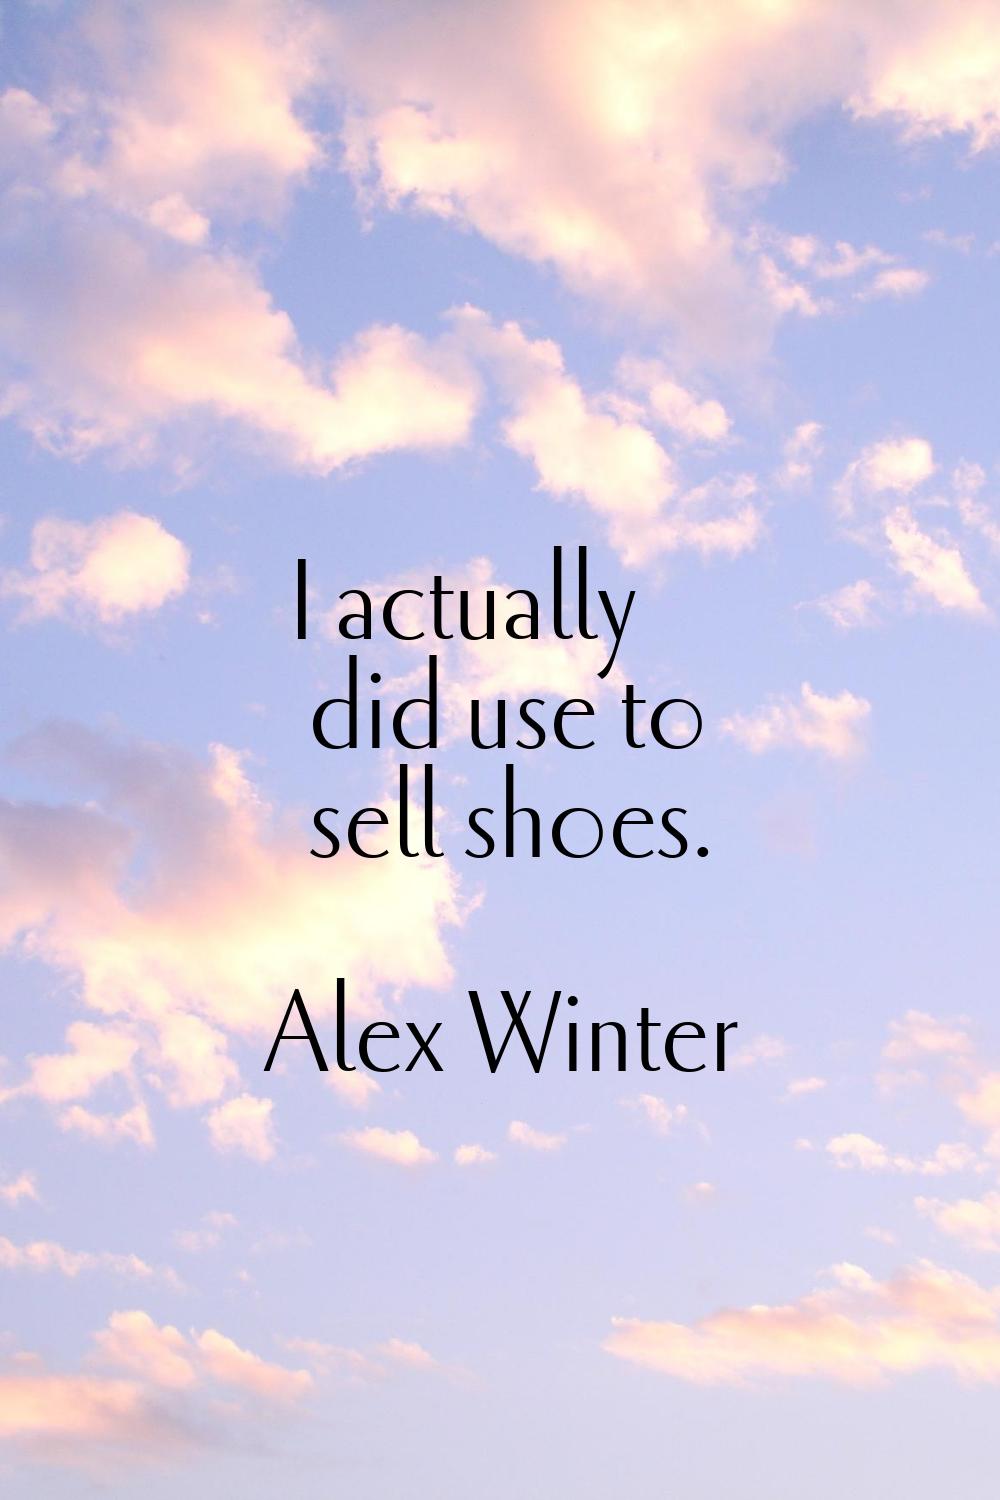 I actually did use to sell shoes.